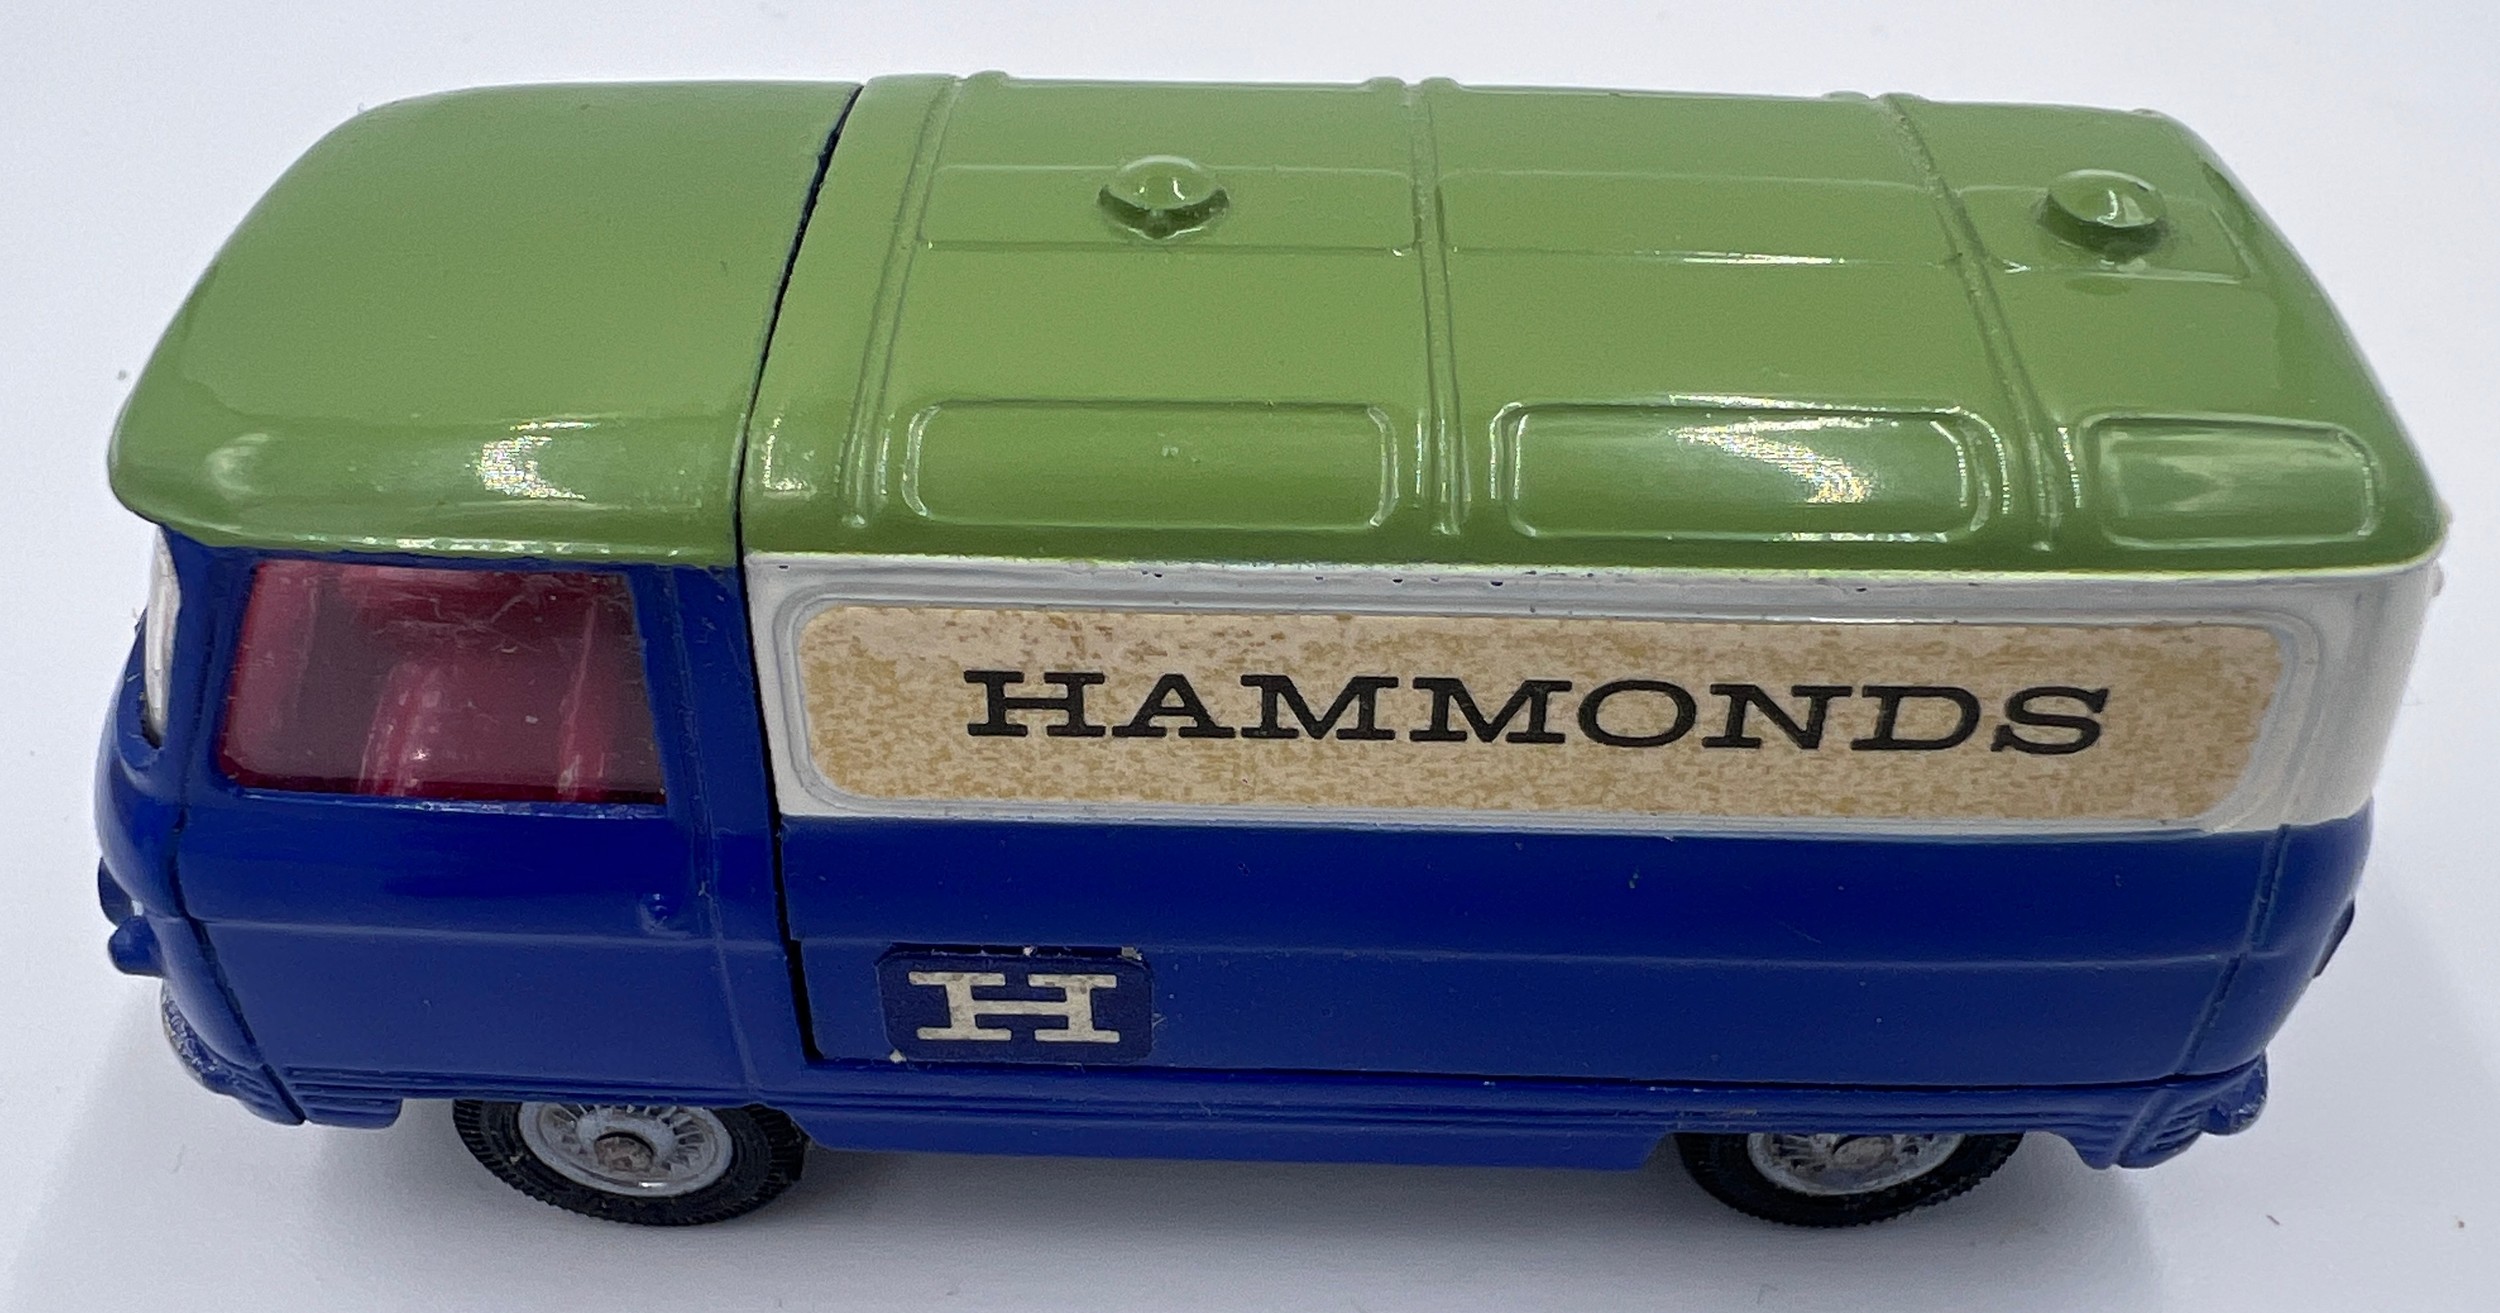 Corgi 462 Commer "Hammonds" Promotional Van in original box - finished in blue with a green roof, - Bild 5 aus 11